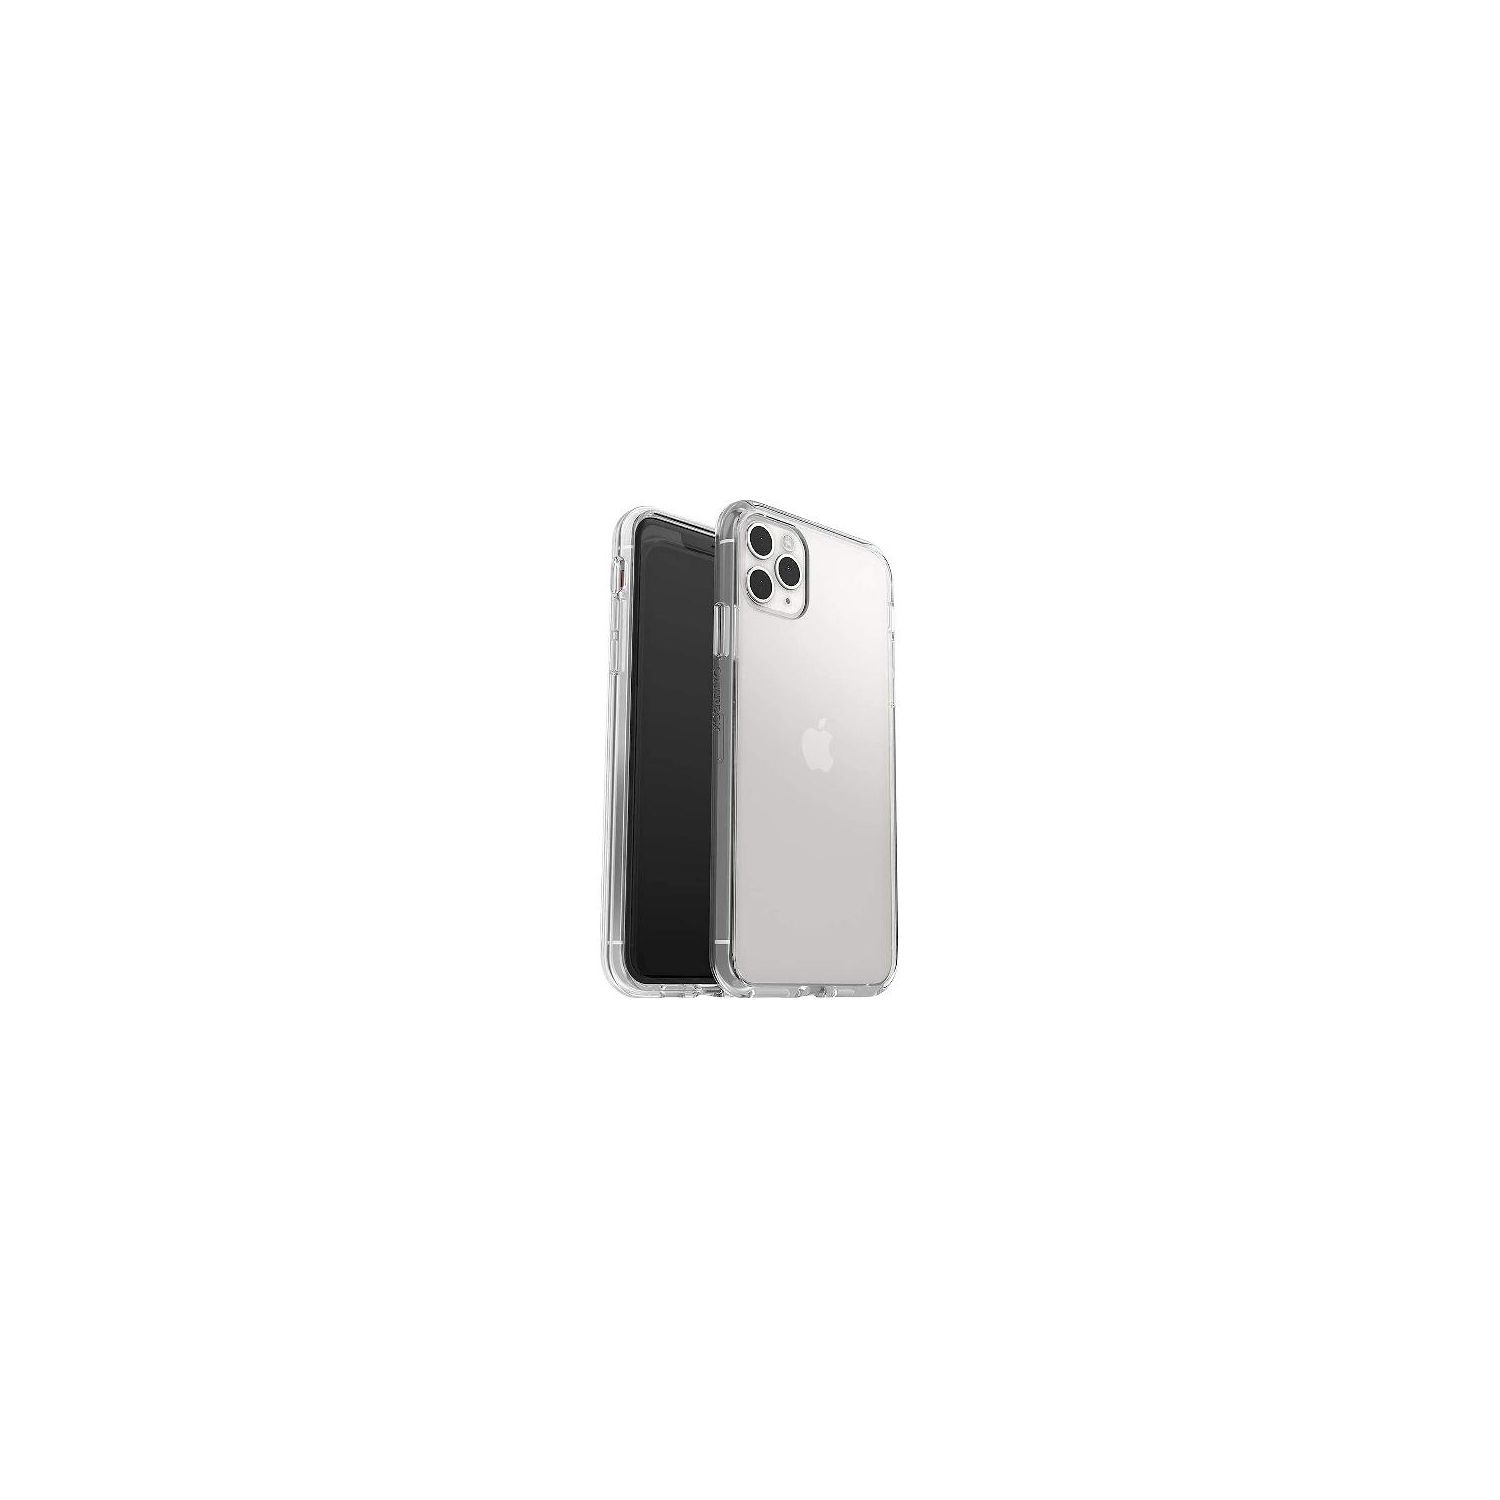 OtterBox Prefix Series Case for iPhone 11 Pro Max, Clear